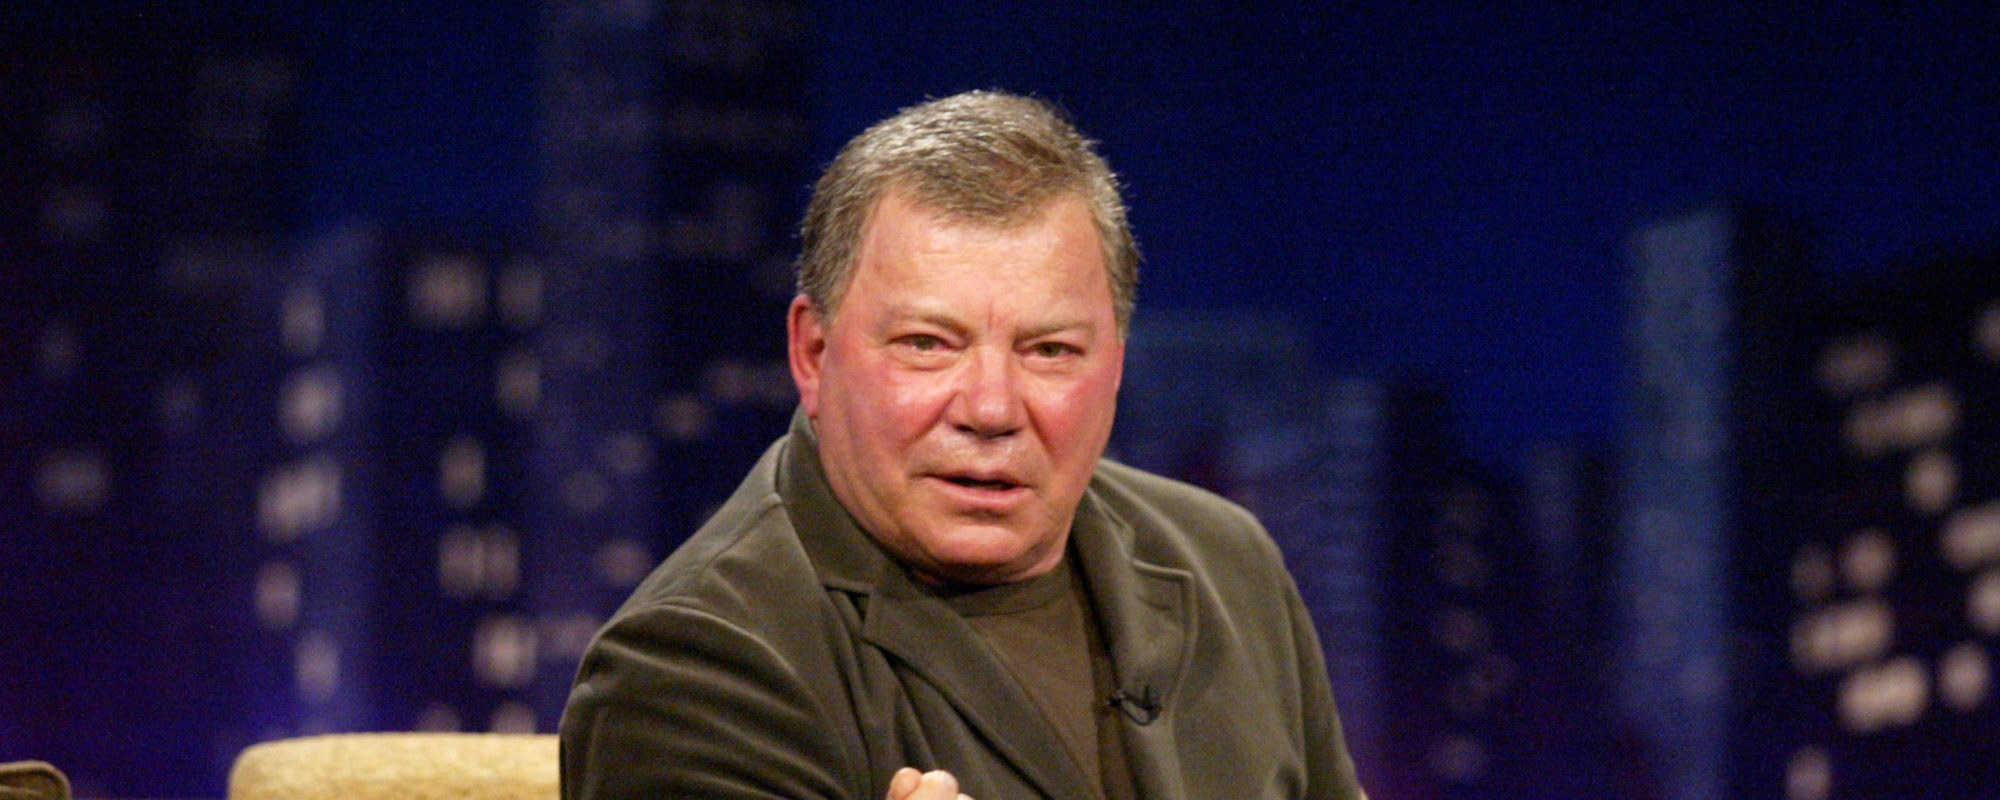 3 Songs You Didn’t Know William Shatner Wrote